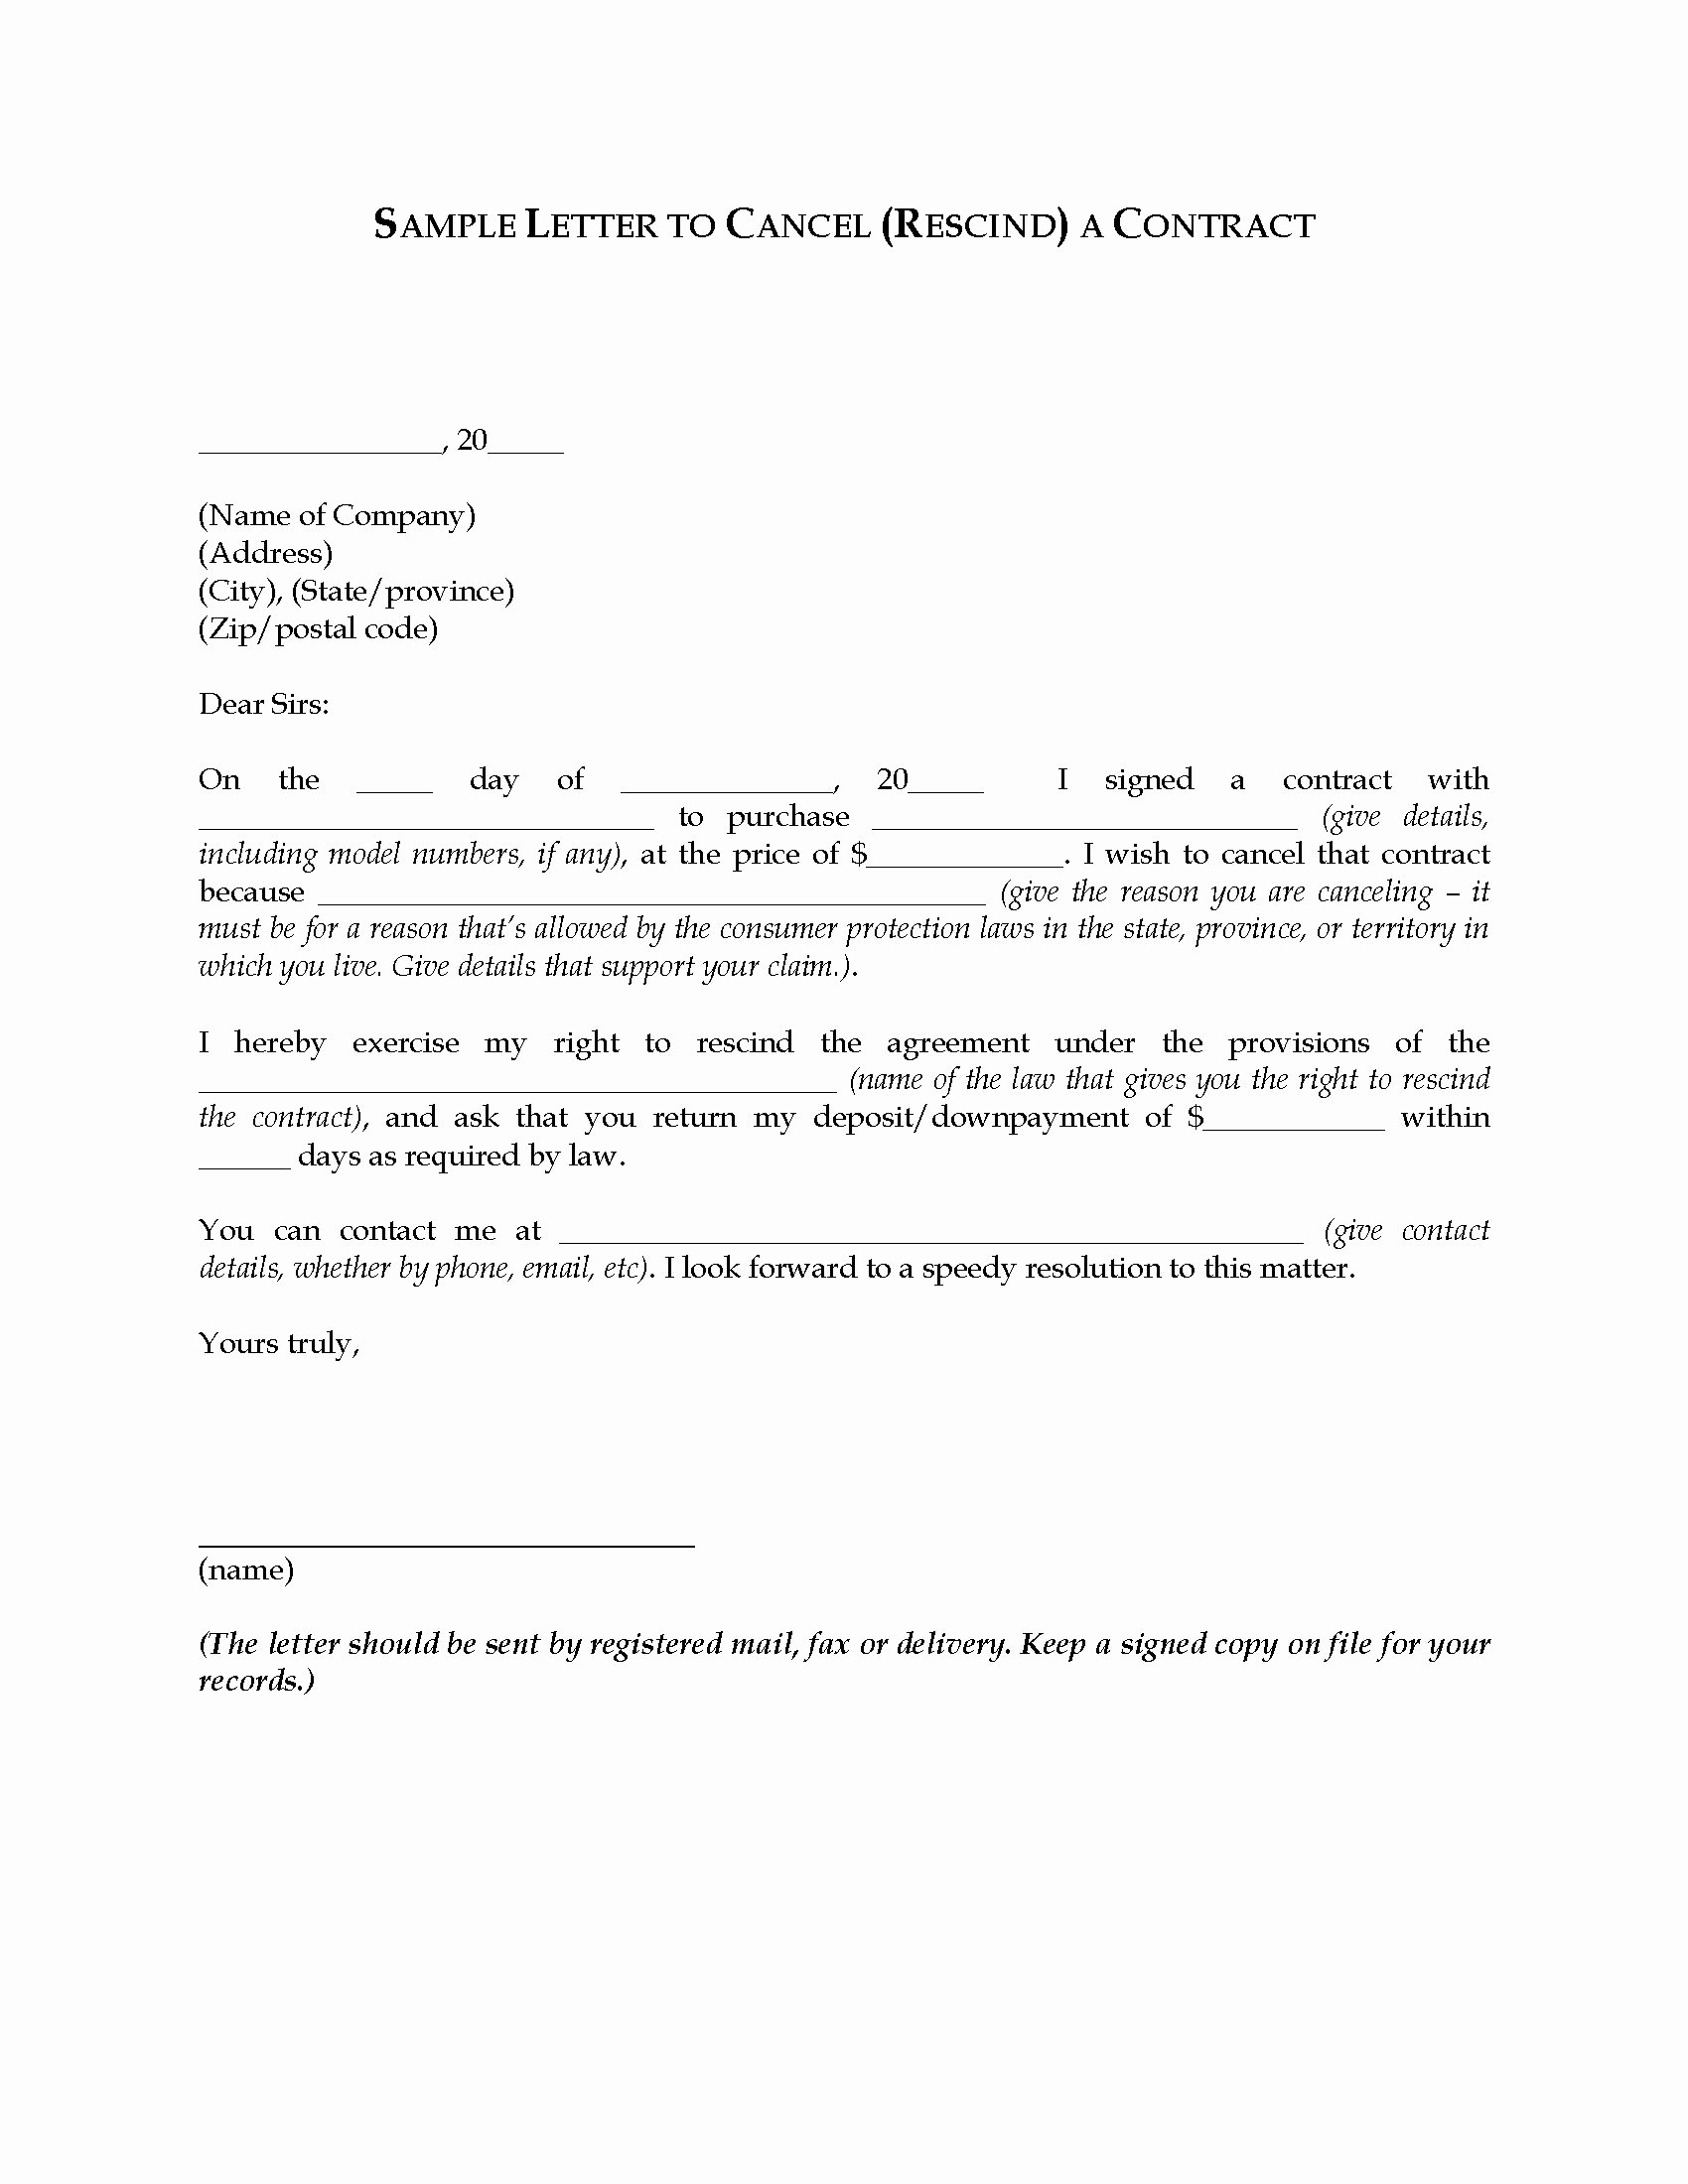 Cancel Timeshare Contract Sample Letter Best Of Letter to Rescind Cancel A Contract